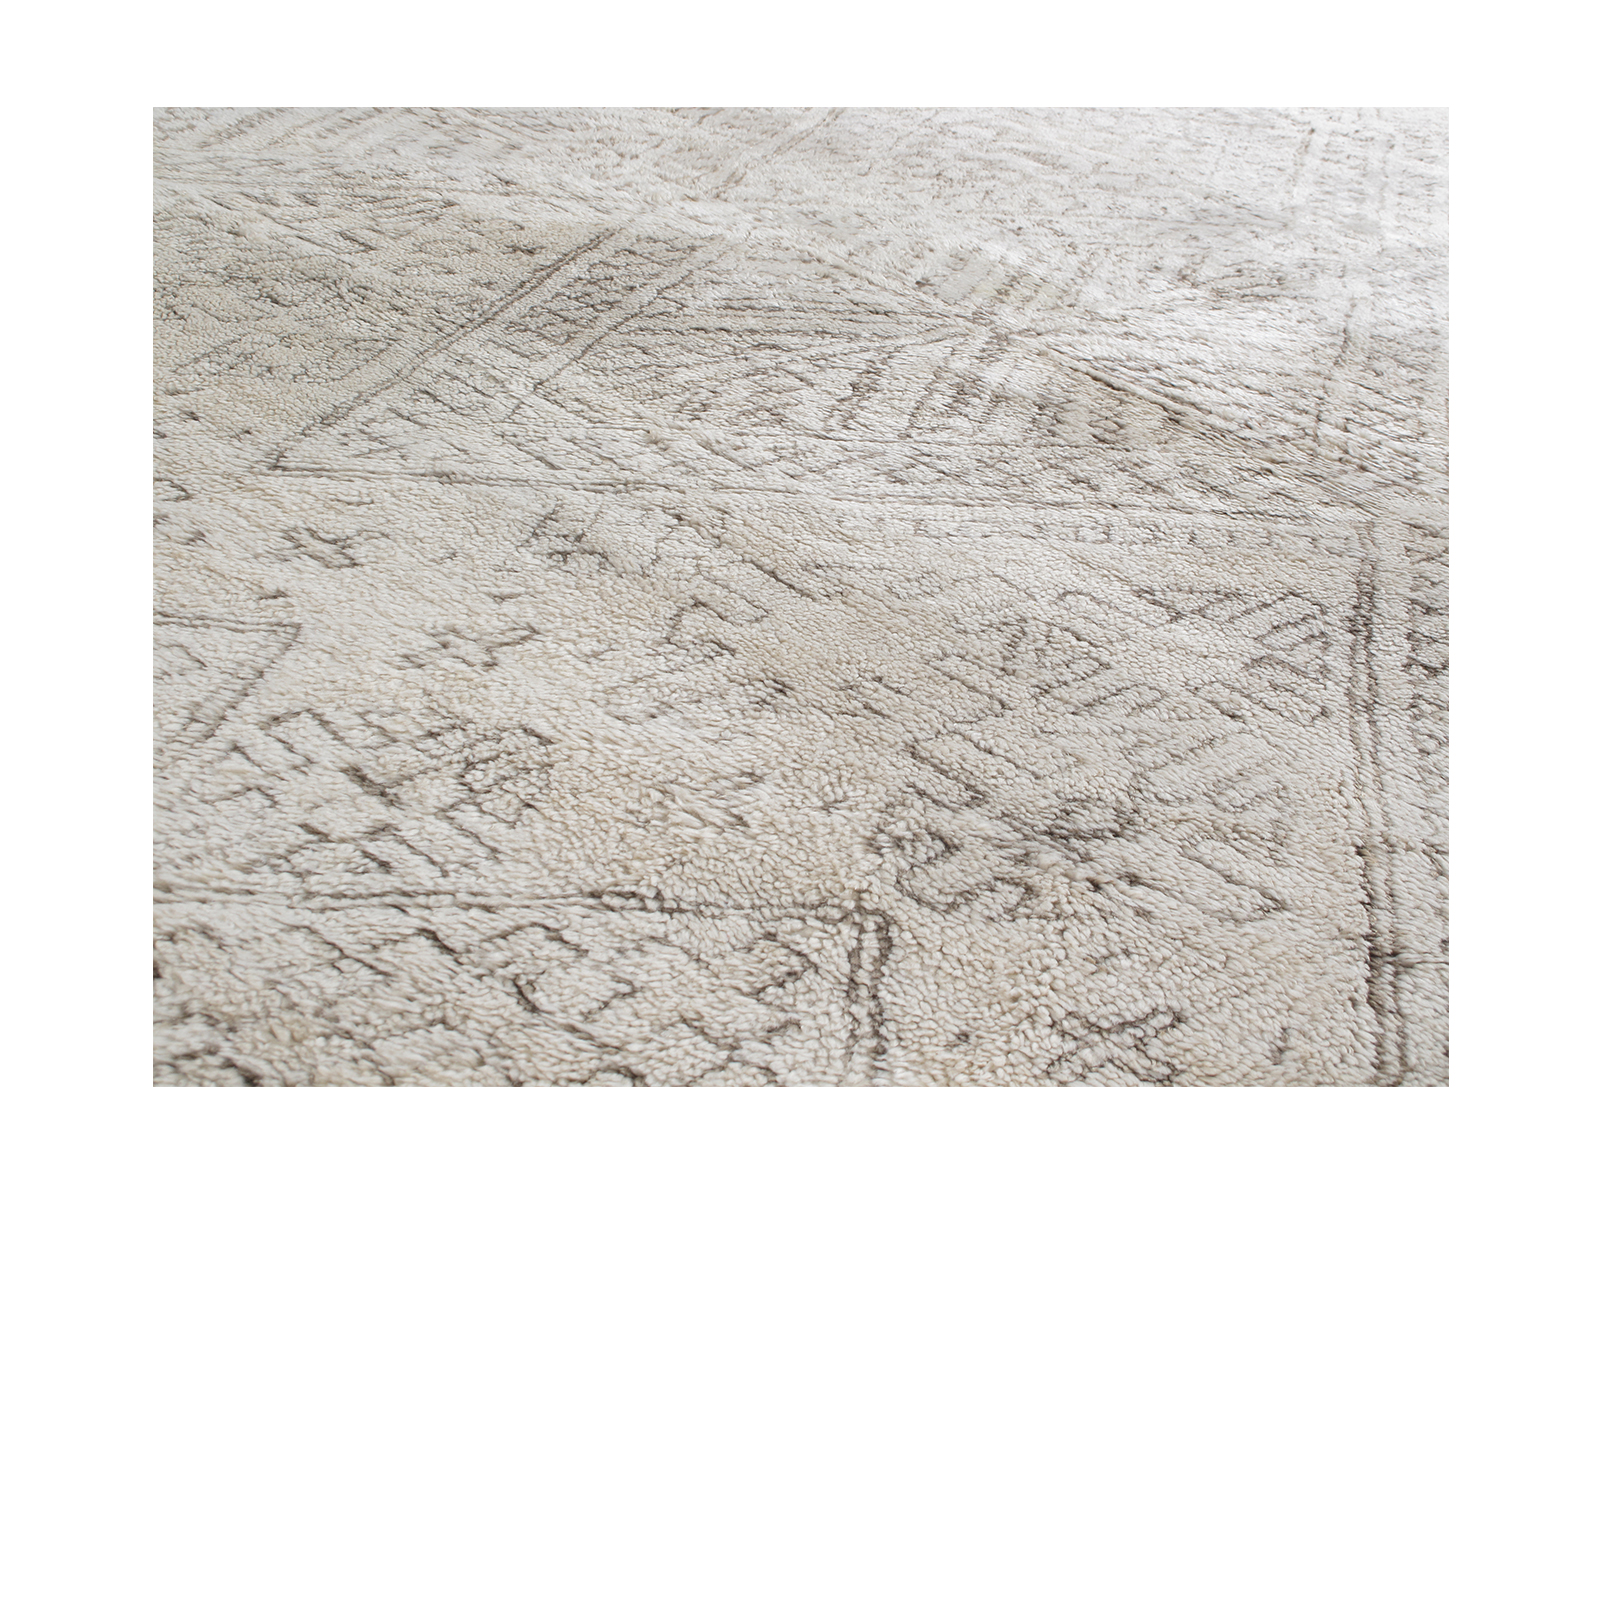 This Berber rug is hand-knotted and and made of 100% wool. 